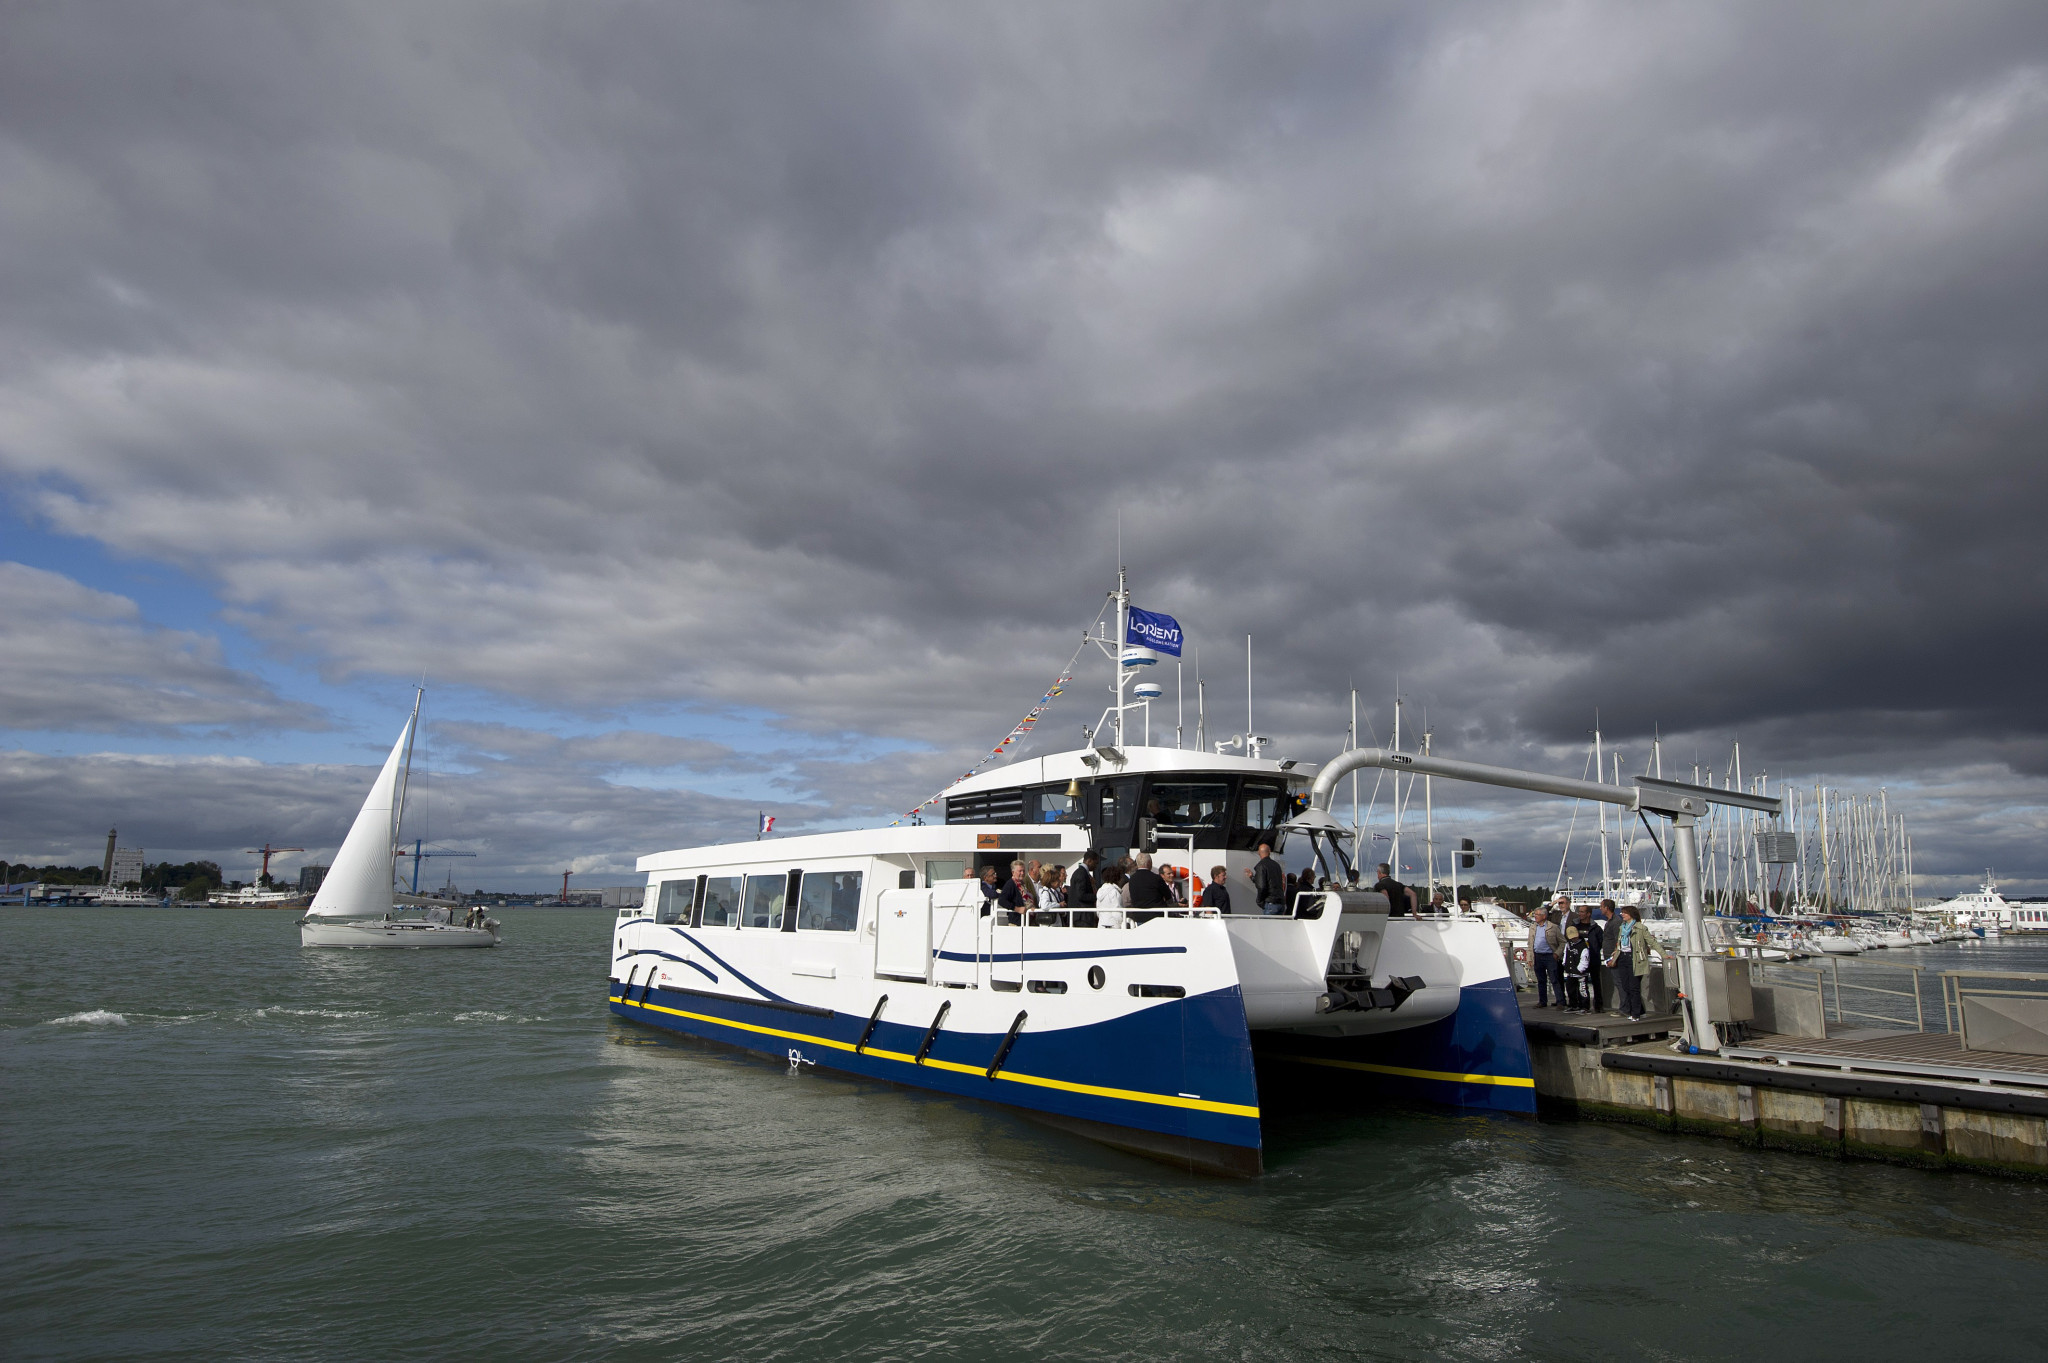 Discussions begin over electric ferry service to be used at Brisbane 2032